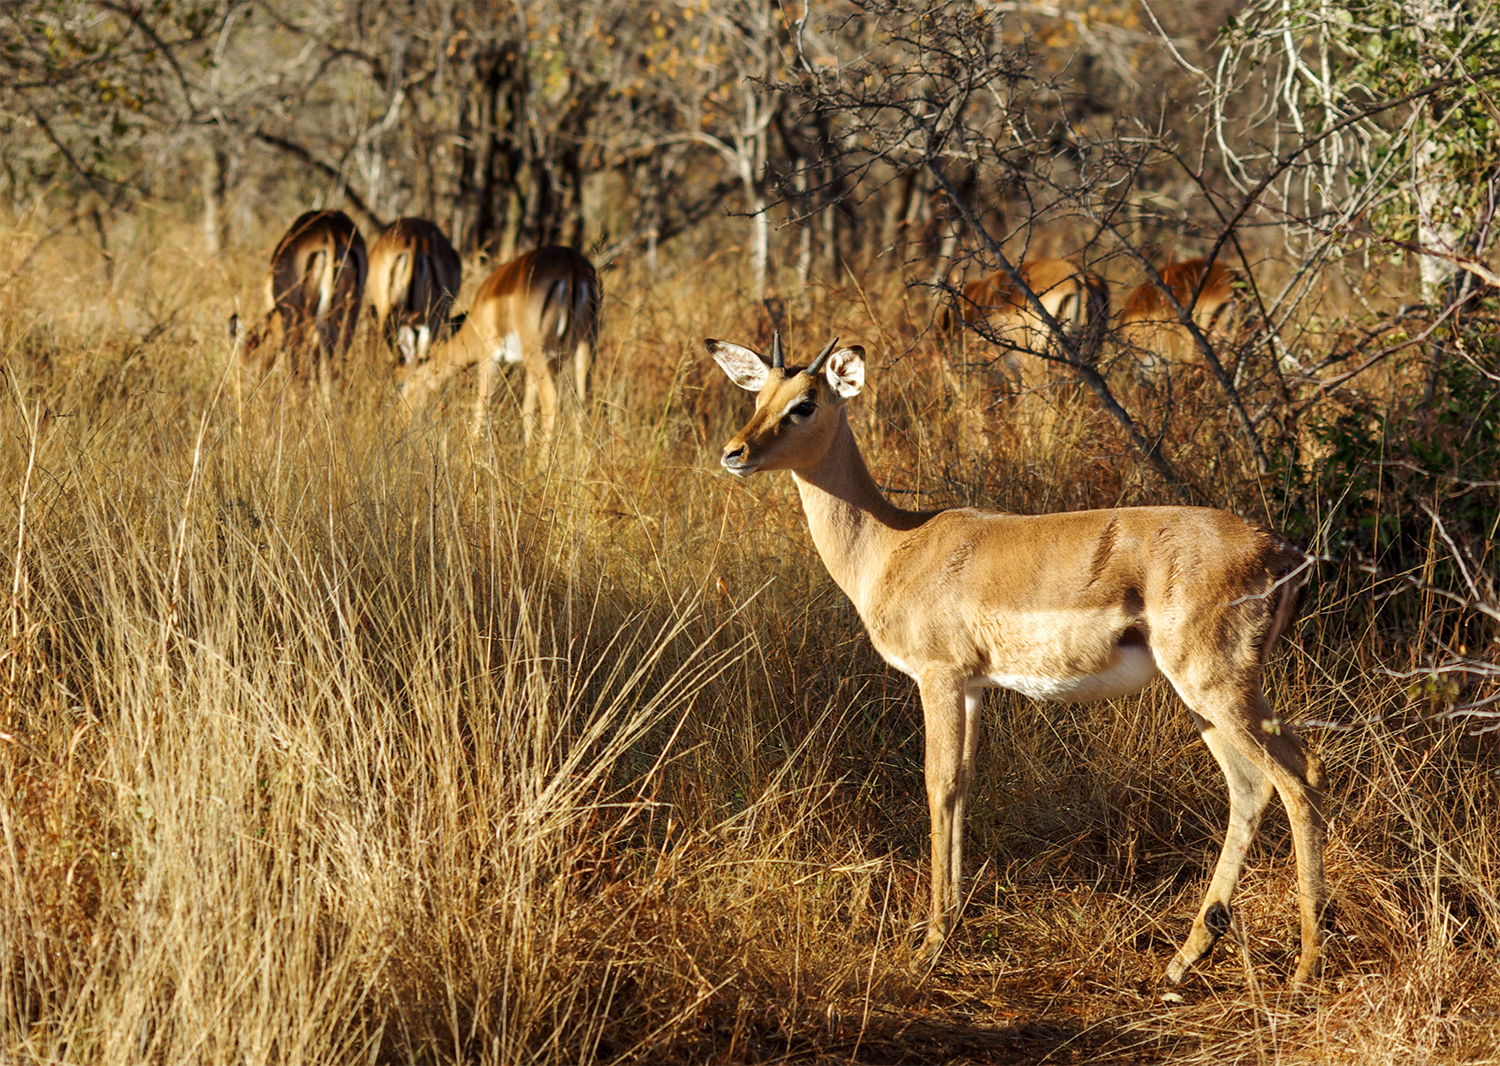 <p>A group of impalas graze as one inspects the photographer. Impalas have a distinctive three-tone body and black stripes on their rears.</p>